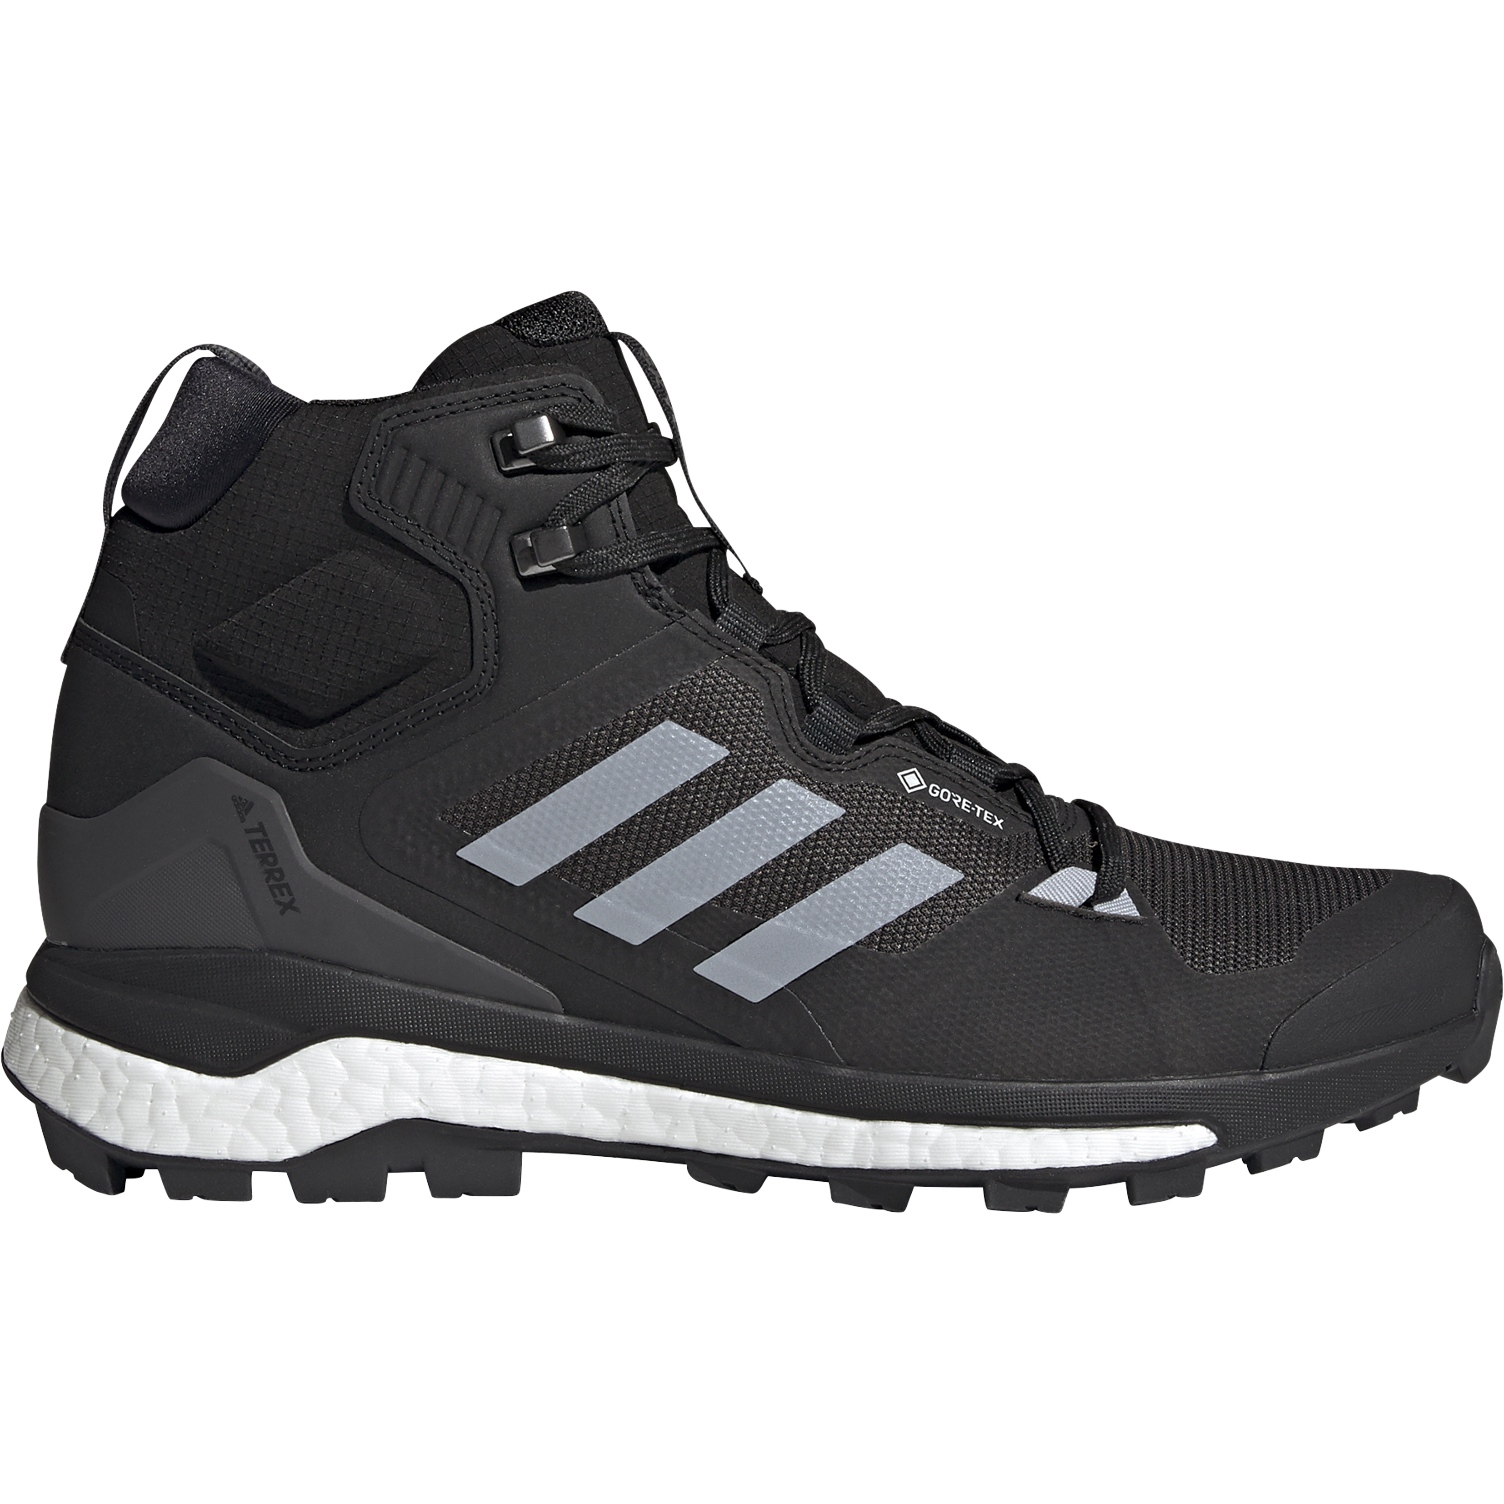 Image of adidas Men's TERREX Skychaser 2.0 Mid GORE-TEX Hiking Shoe - core black/halo silver/dgh solid grey FZ3332